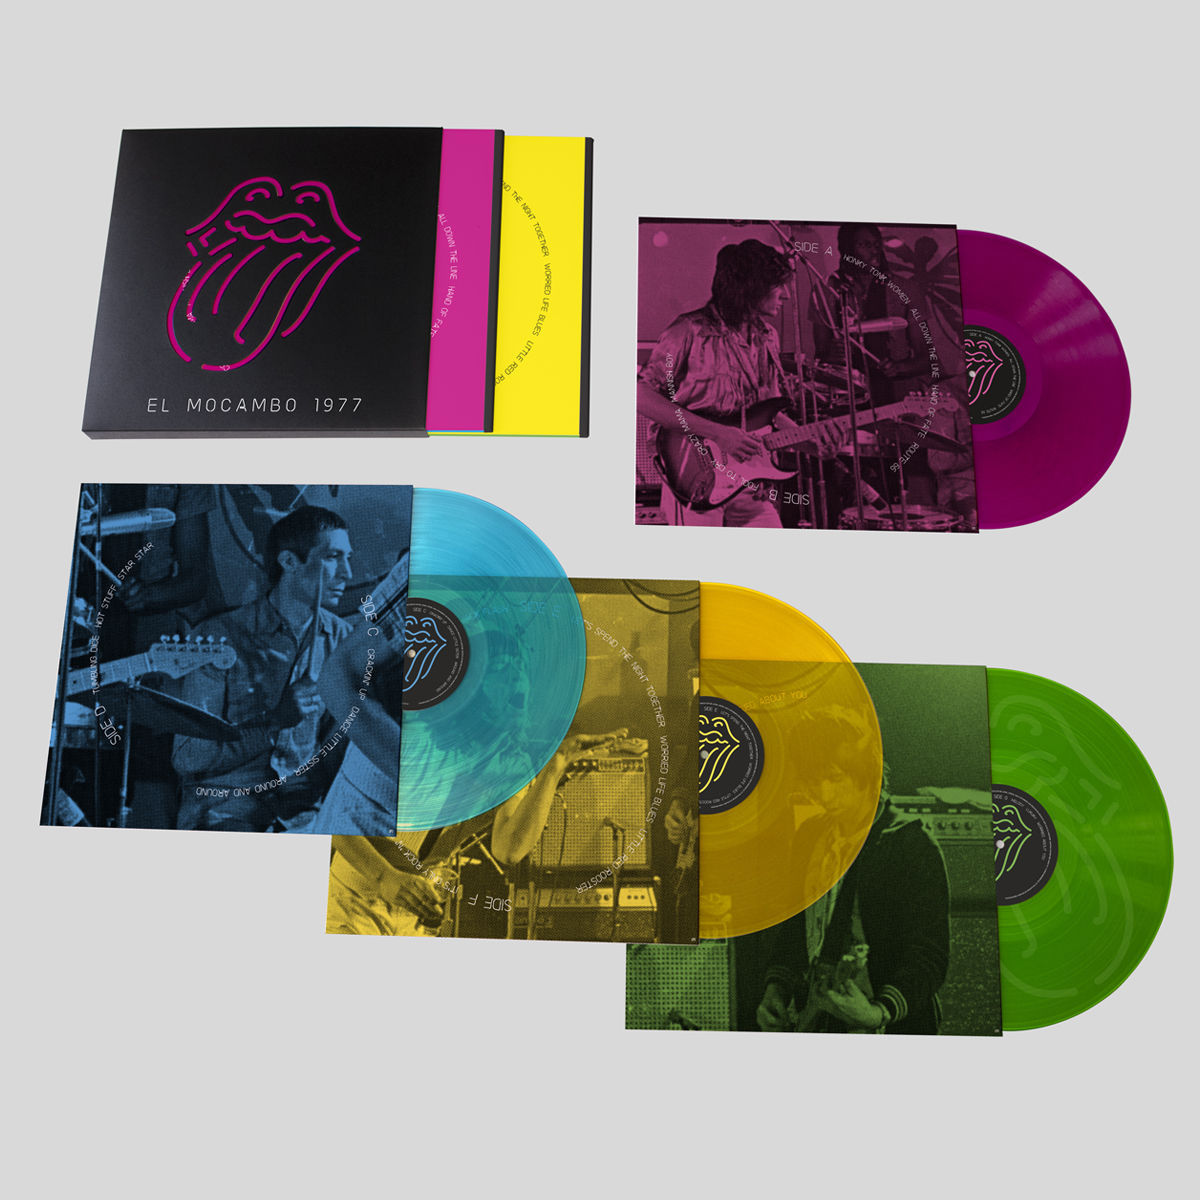 Four neon vinyl albums from the Rolling Stones el Mocambo collection